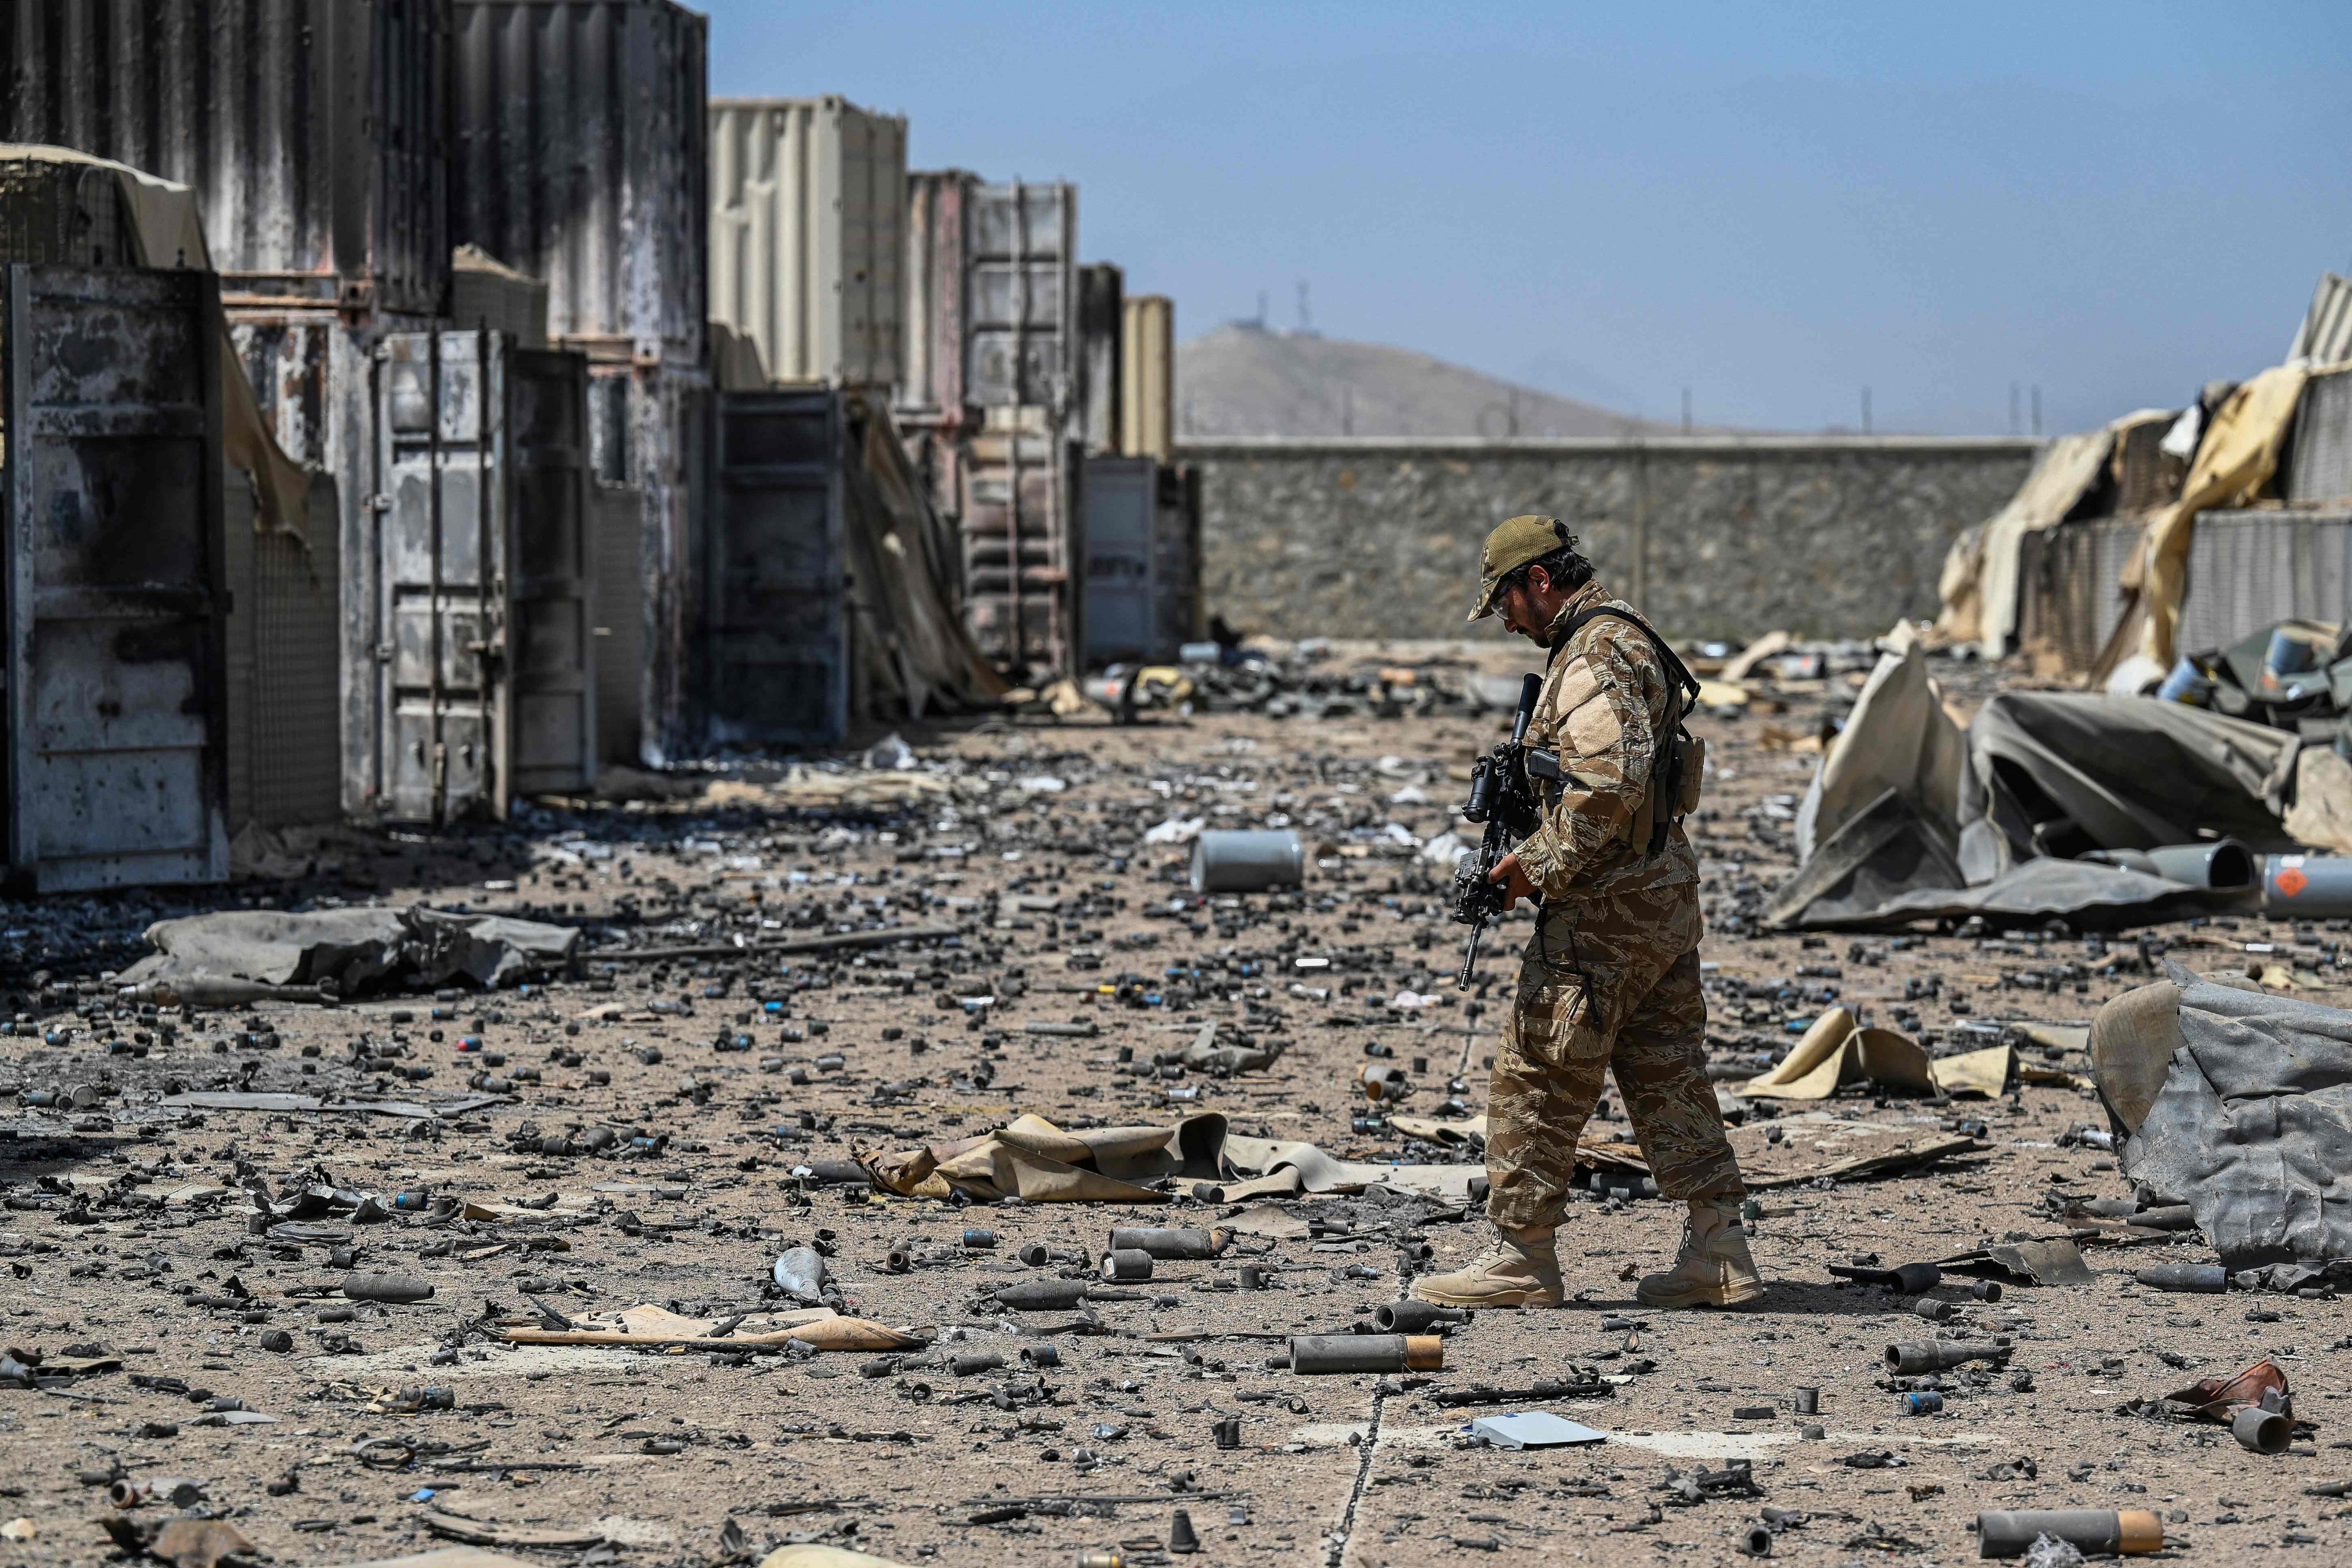 A member of a Taliban military unit walks amid debris of the destroyed Central Intelligence Agency base in Deh Sabz district, northeast of Kabul, Afghanistan, on September 6. Photo: AFP